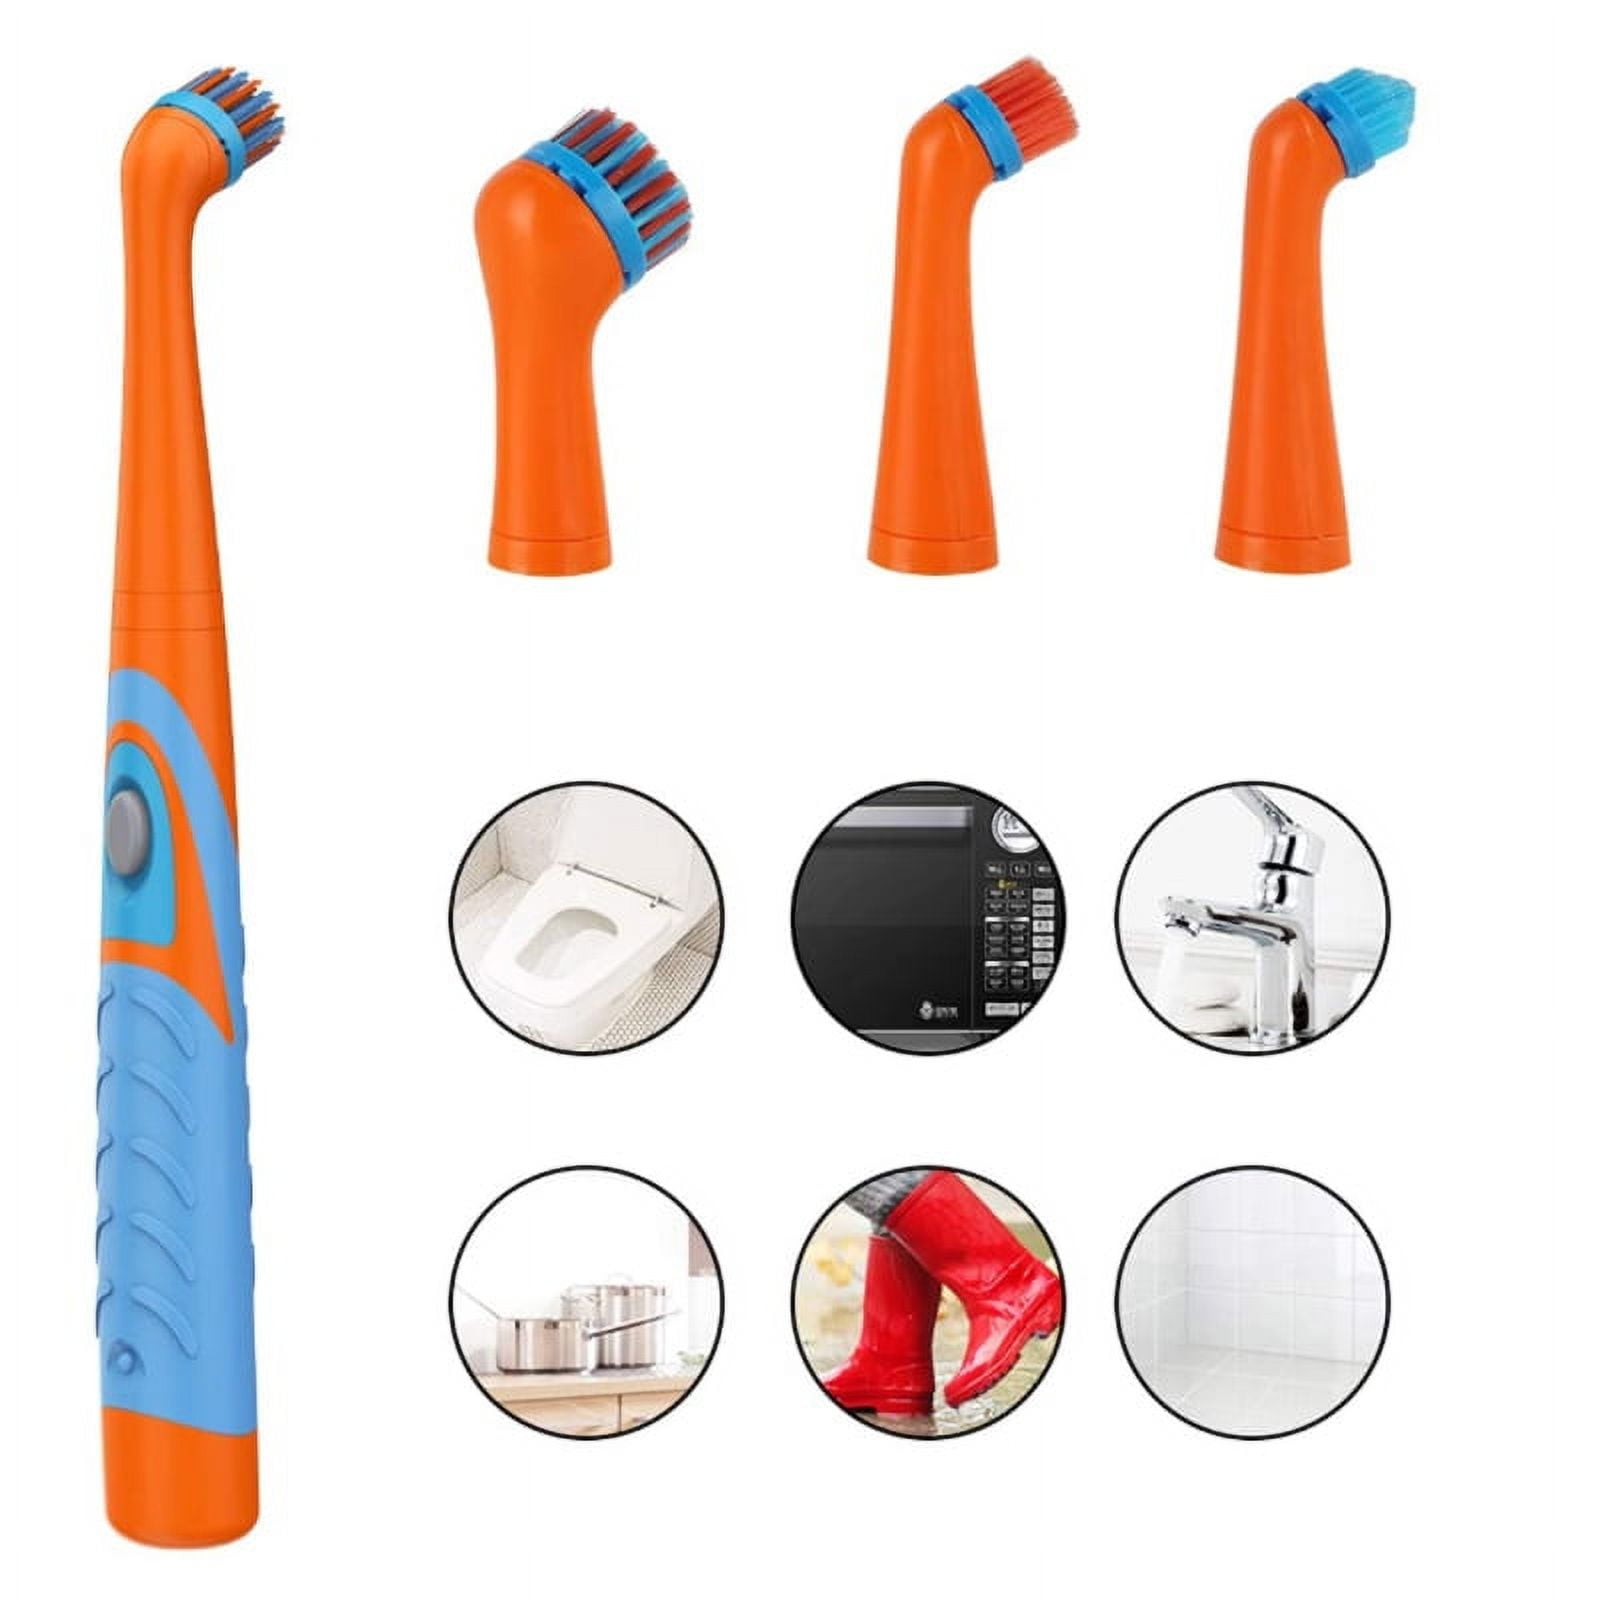 Sonic Scrubber Oscillating Cleaning Tool for Kitchen And Bathroom, Orange